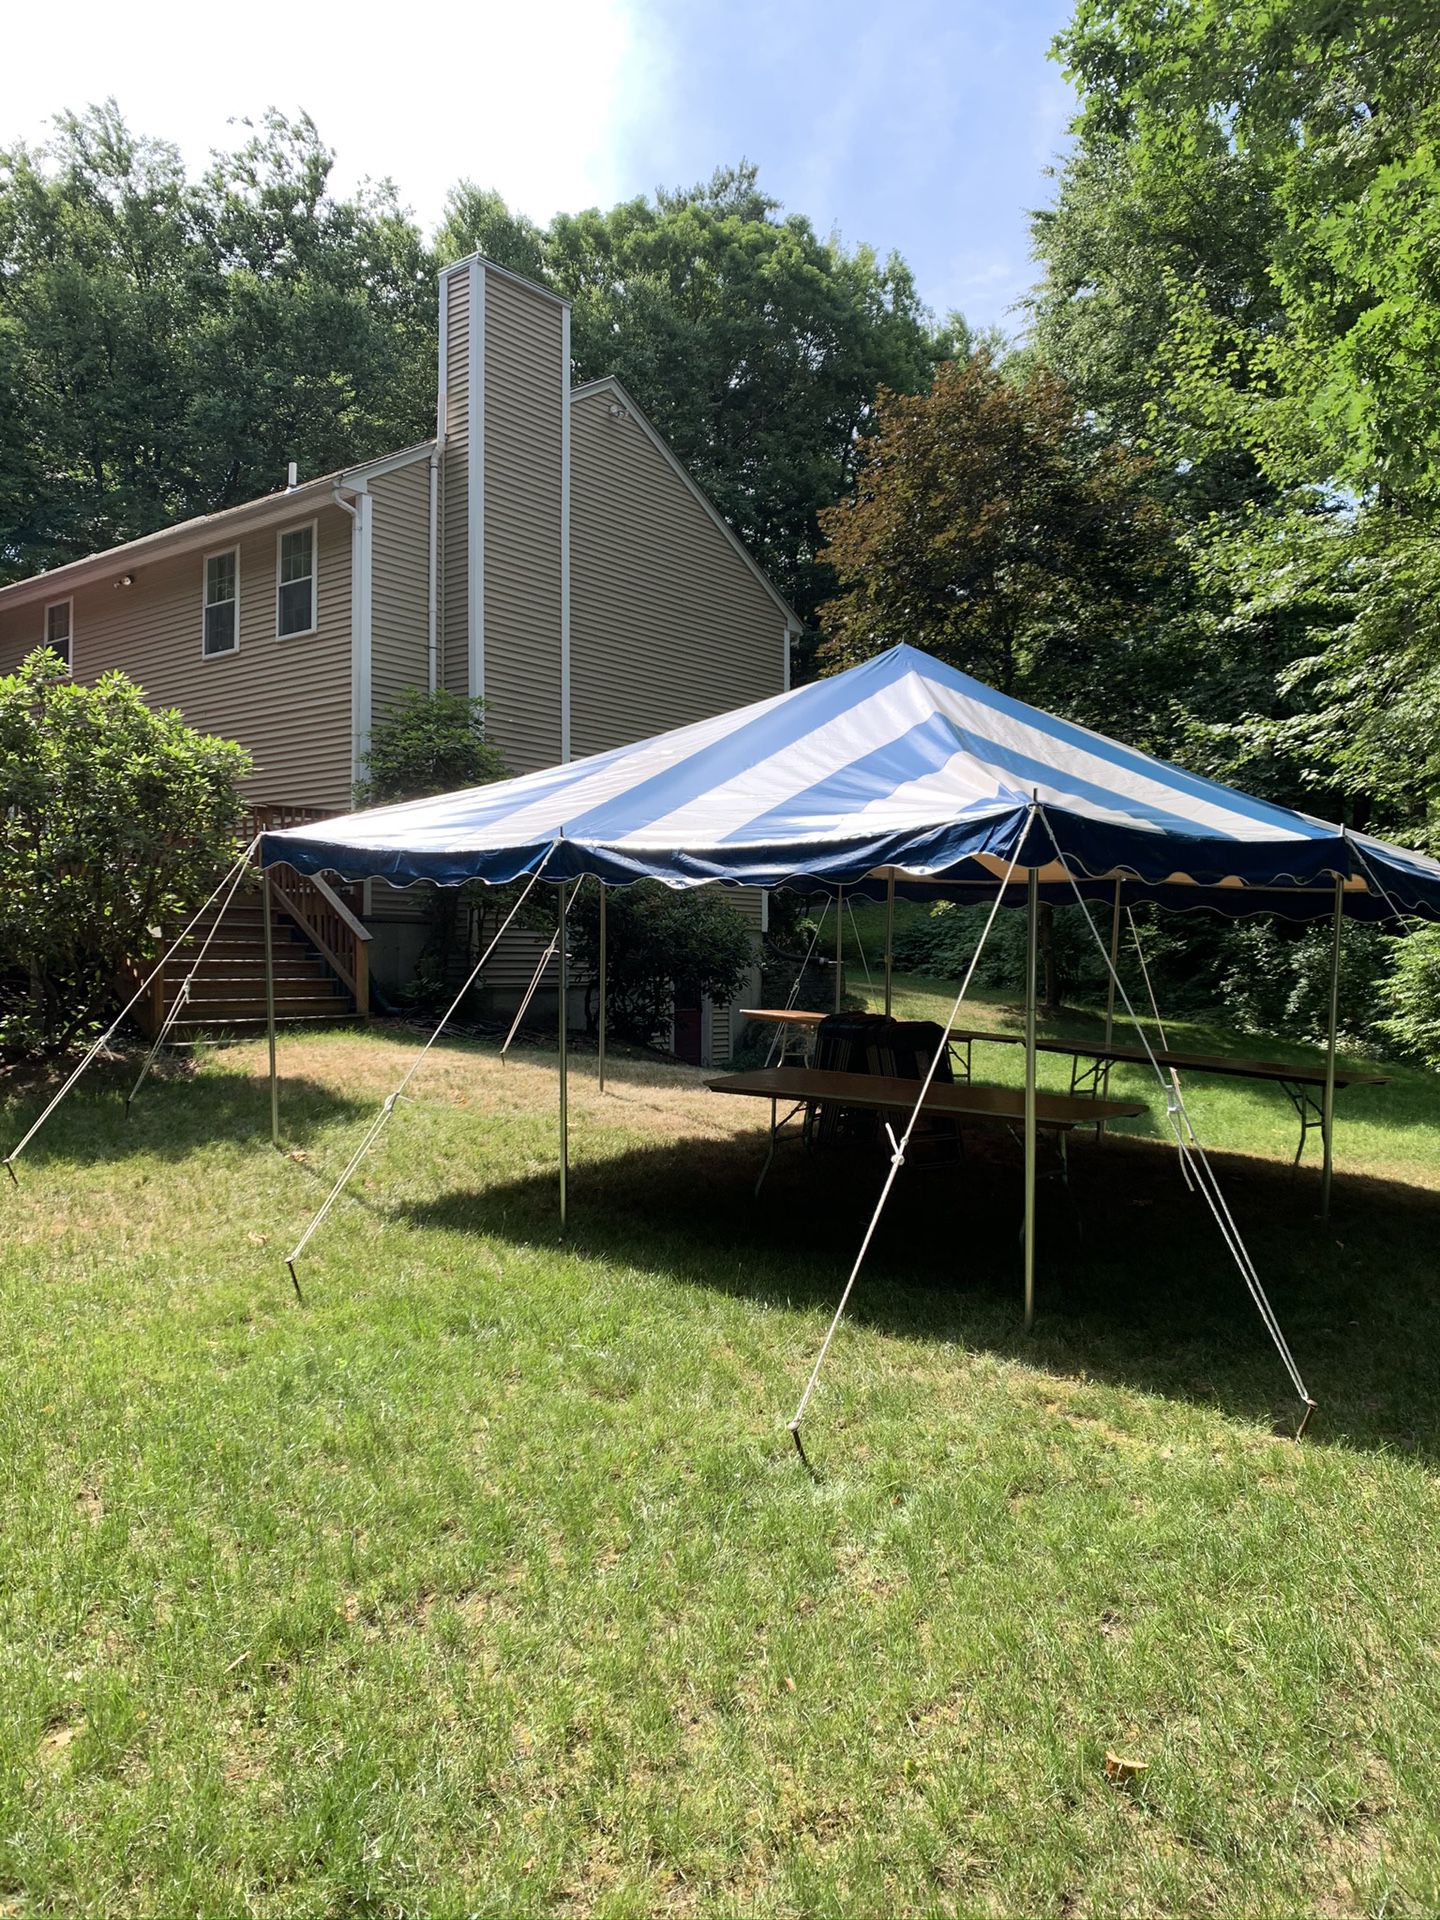 Party tents. 20X20 $600 each.